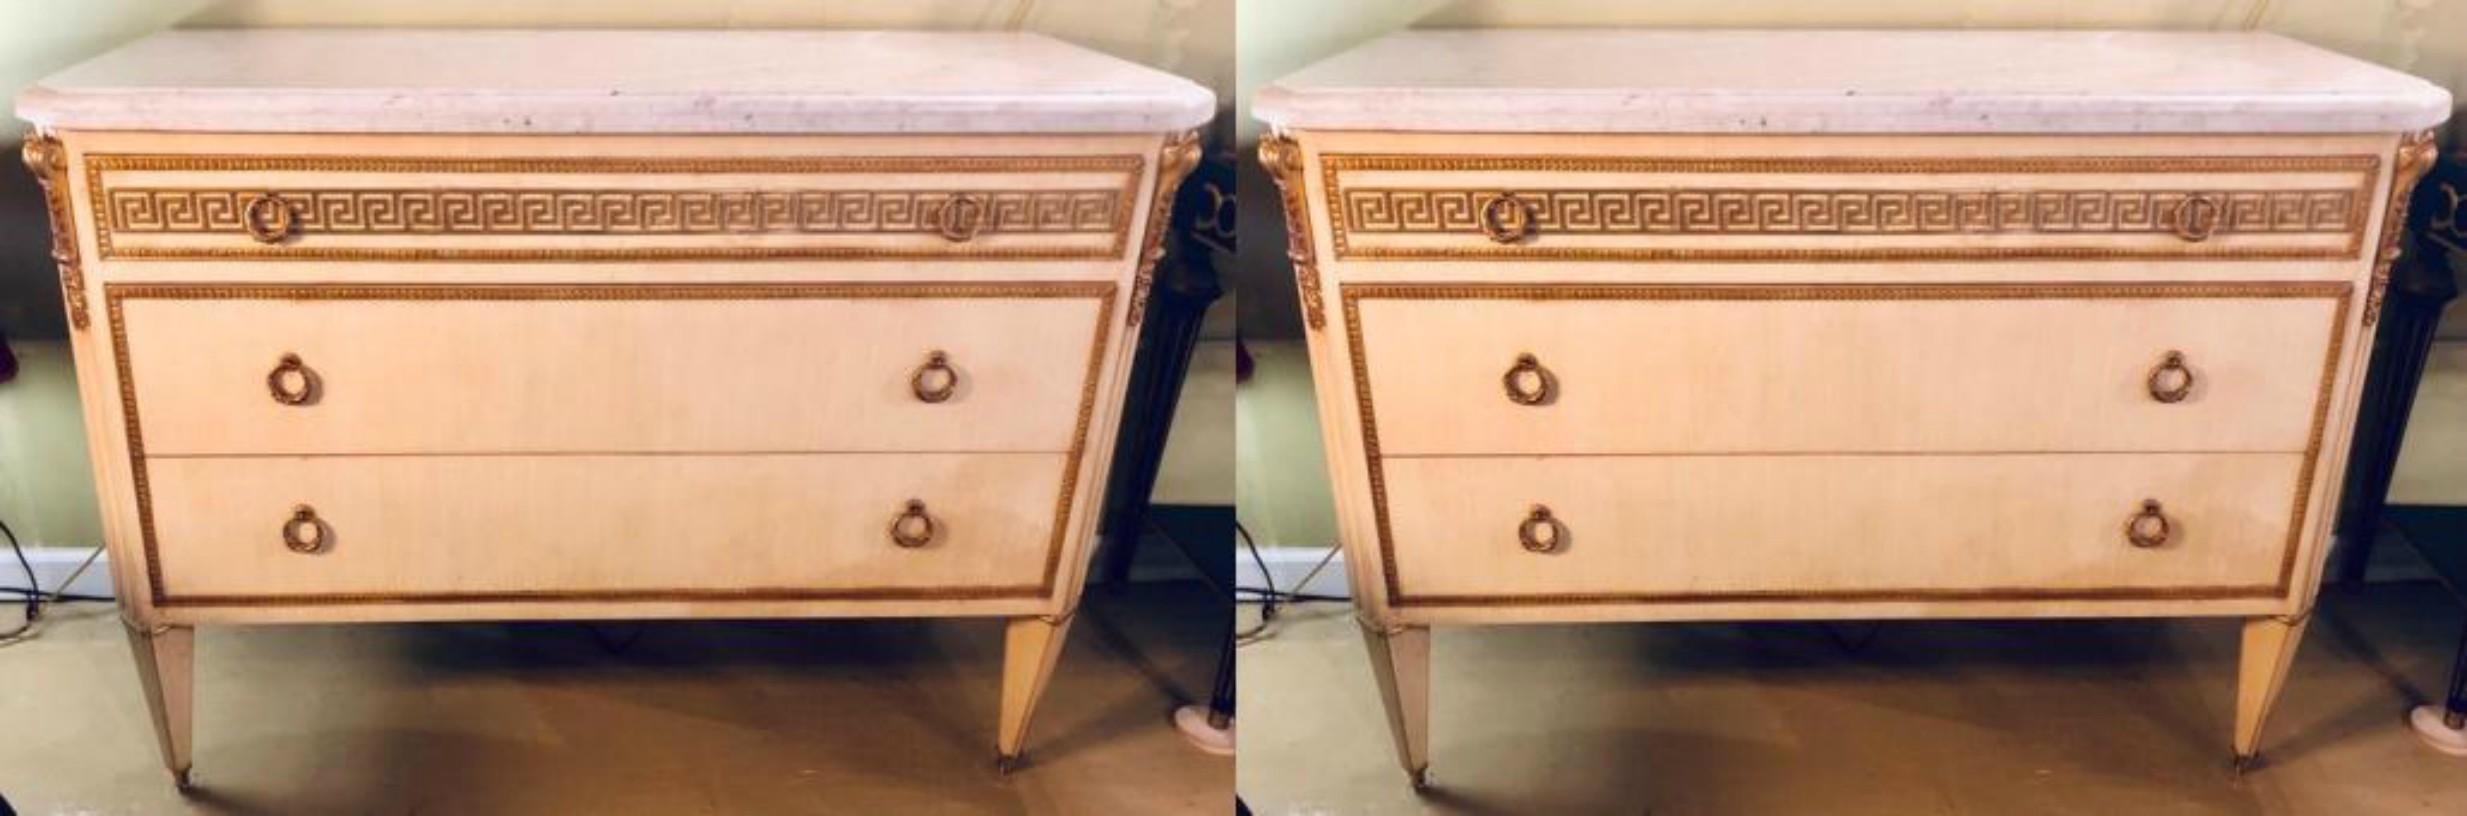 Pair of Hollywood Regency faux linen paint decorated Greek key design white marble-top commodes in the style of Maison Jansen. This fine pair of custom quality commodes are simply stunning and certain to light up and shine in any room in the